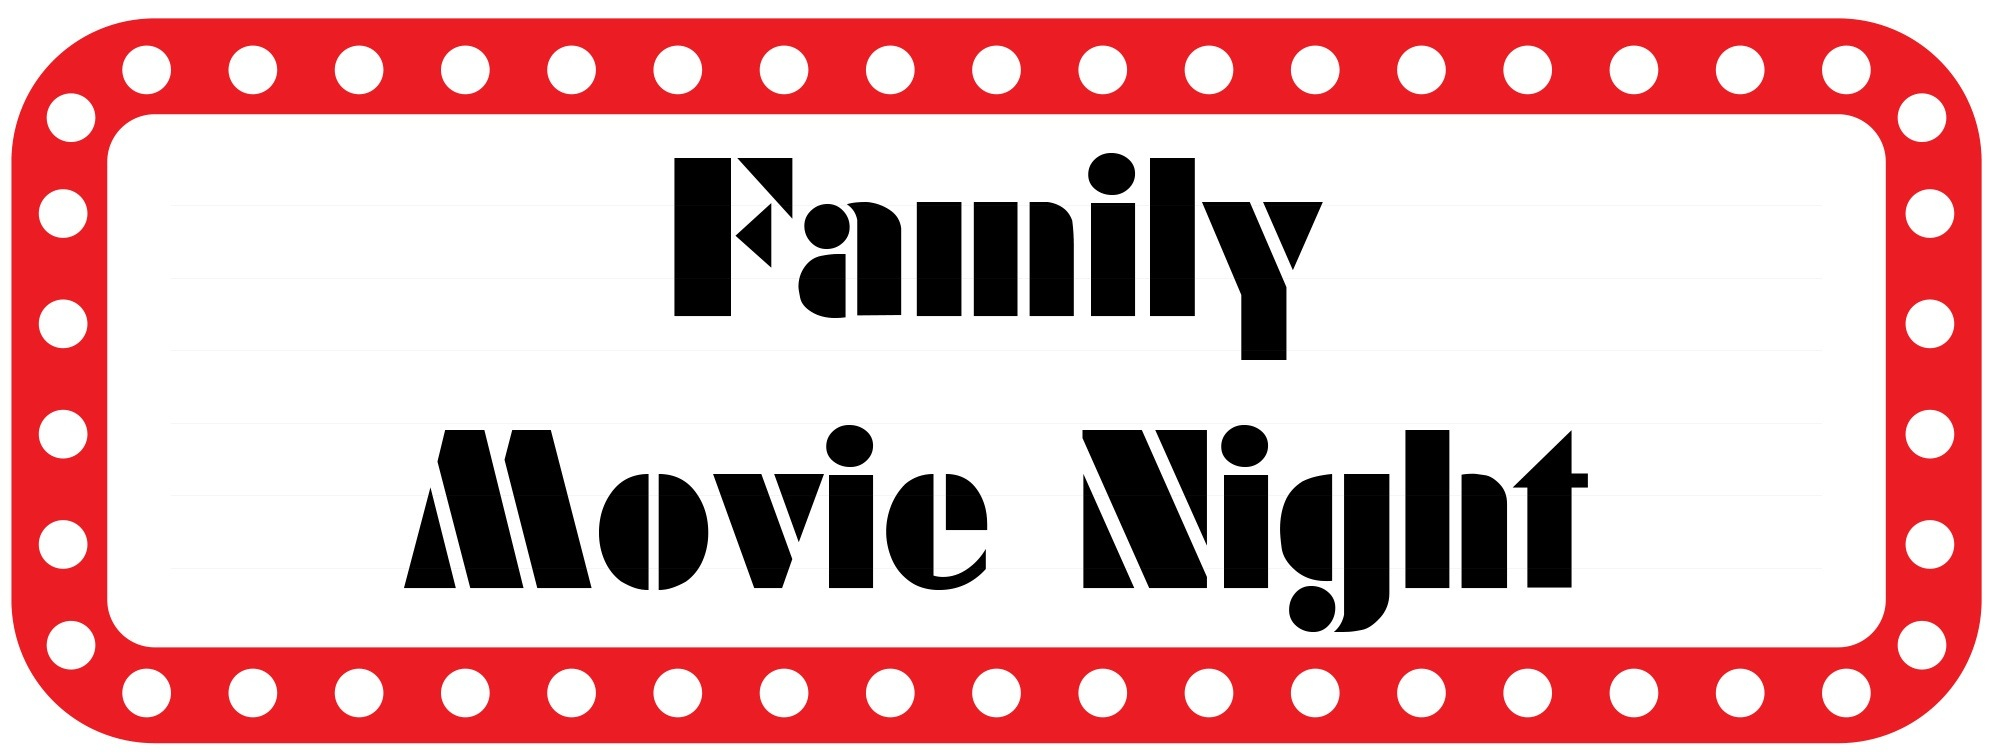 Movie night clipart the cliparts